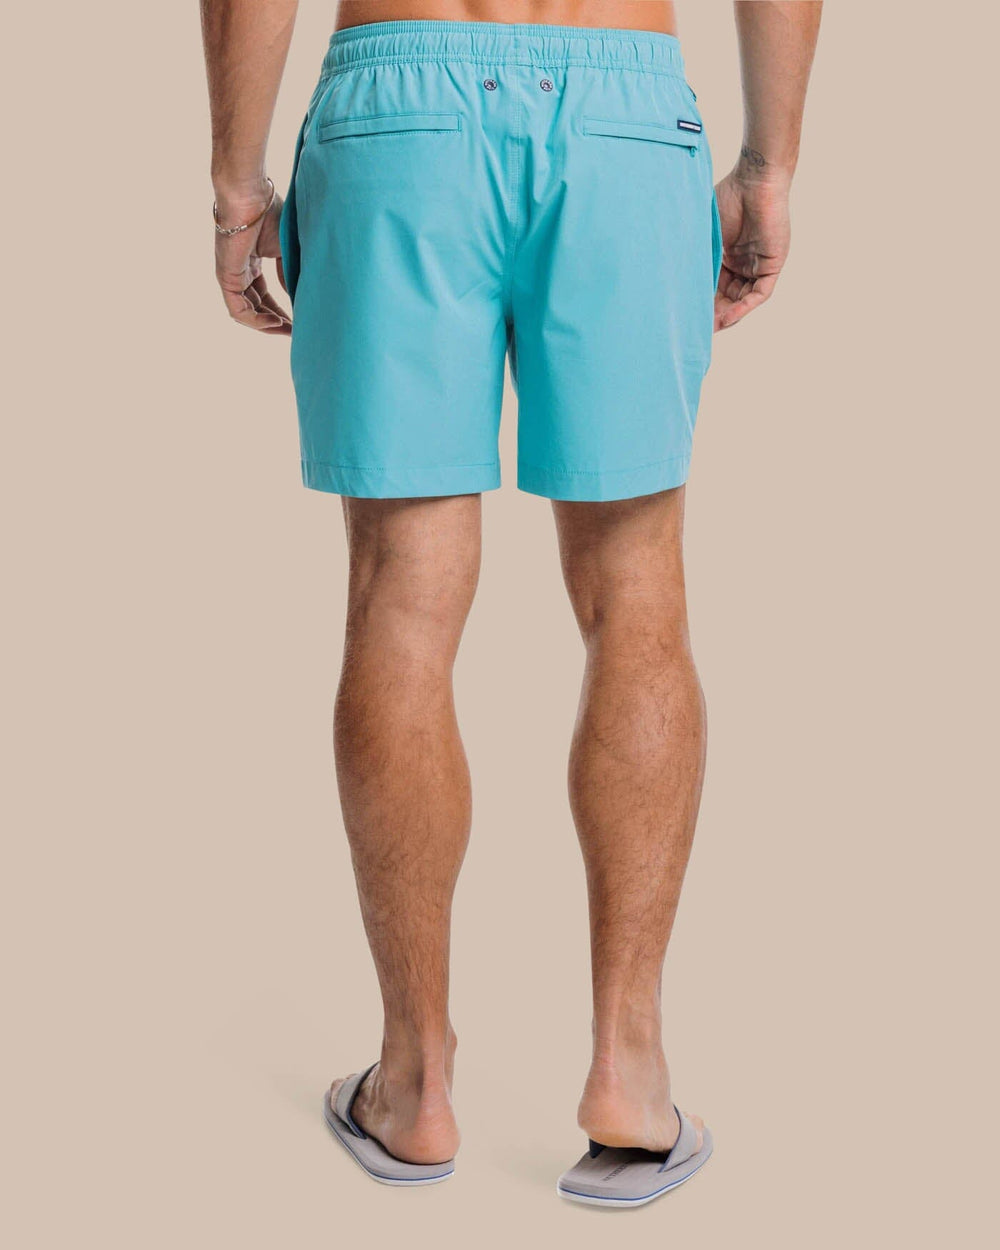 The back view of the Southern Tide Solid Swim Trunk 3 by Southern Tide - Tidal Wave